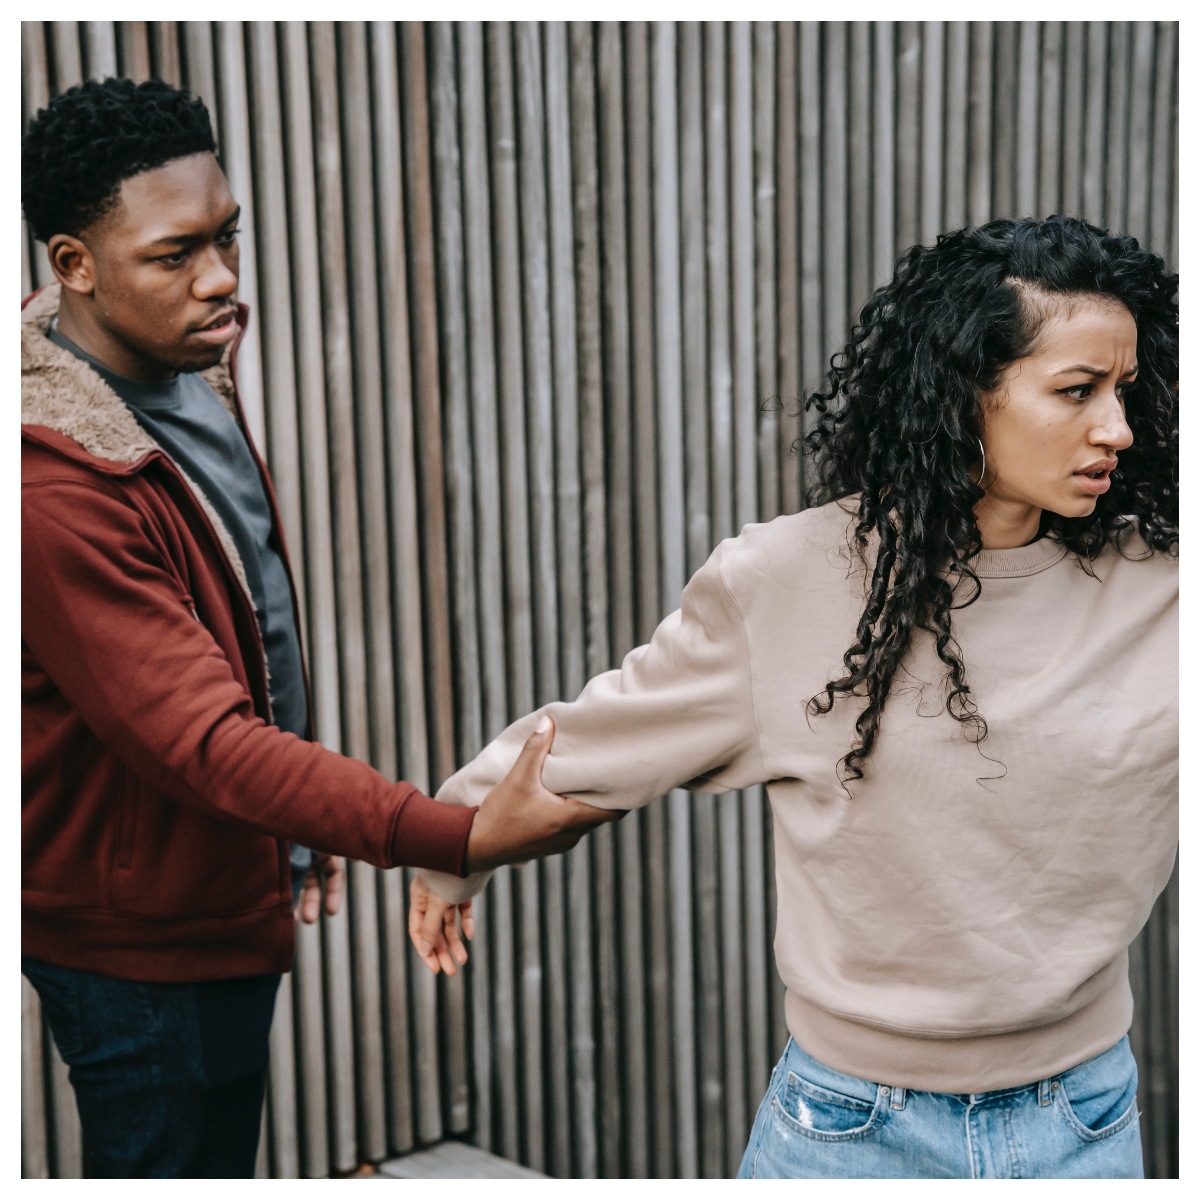 4 Signs to walk away from someone you love